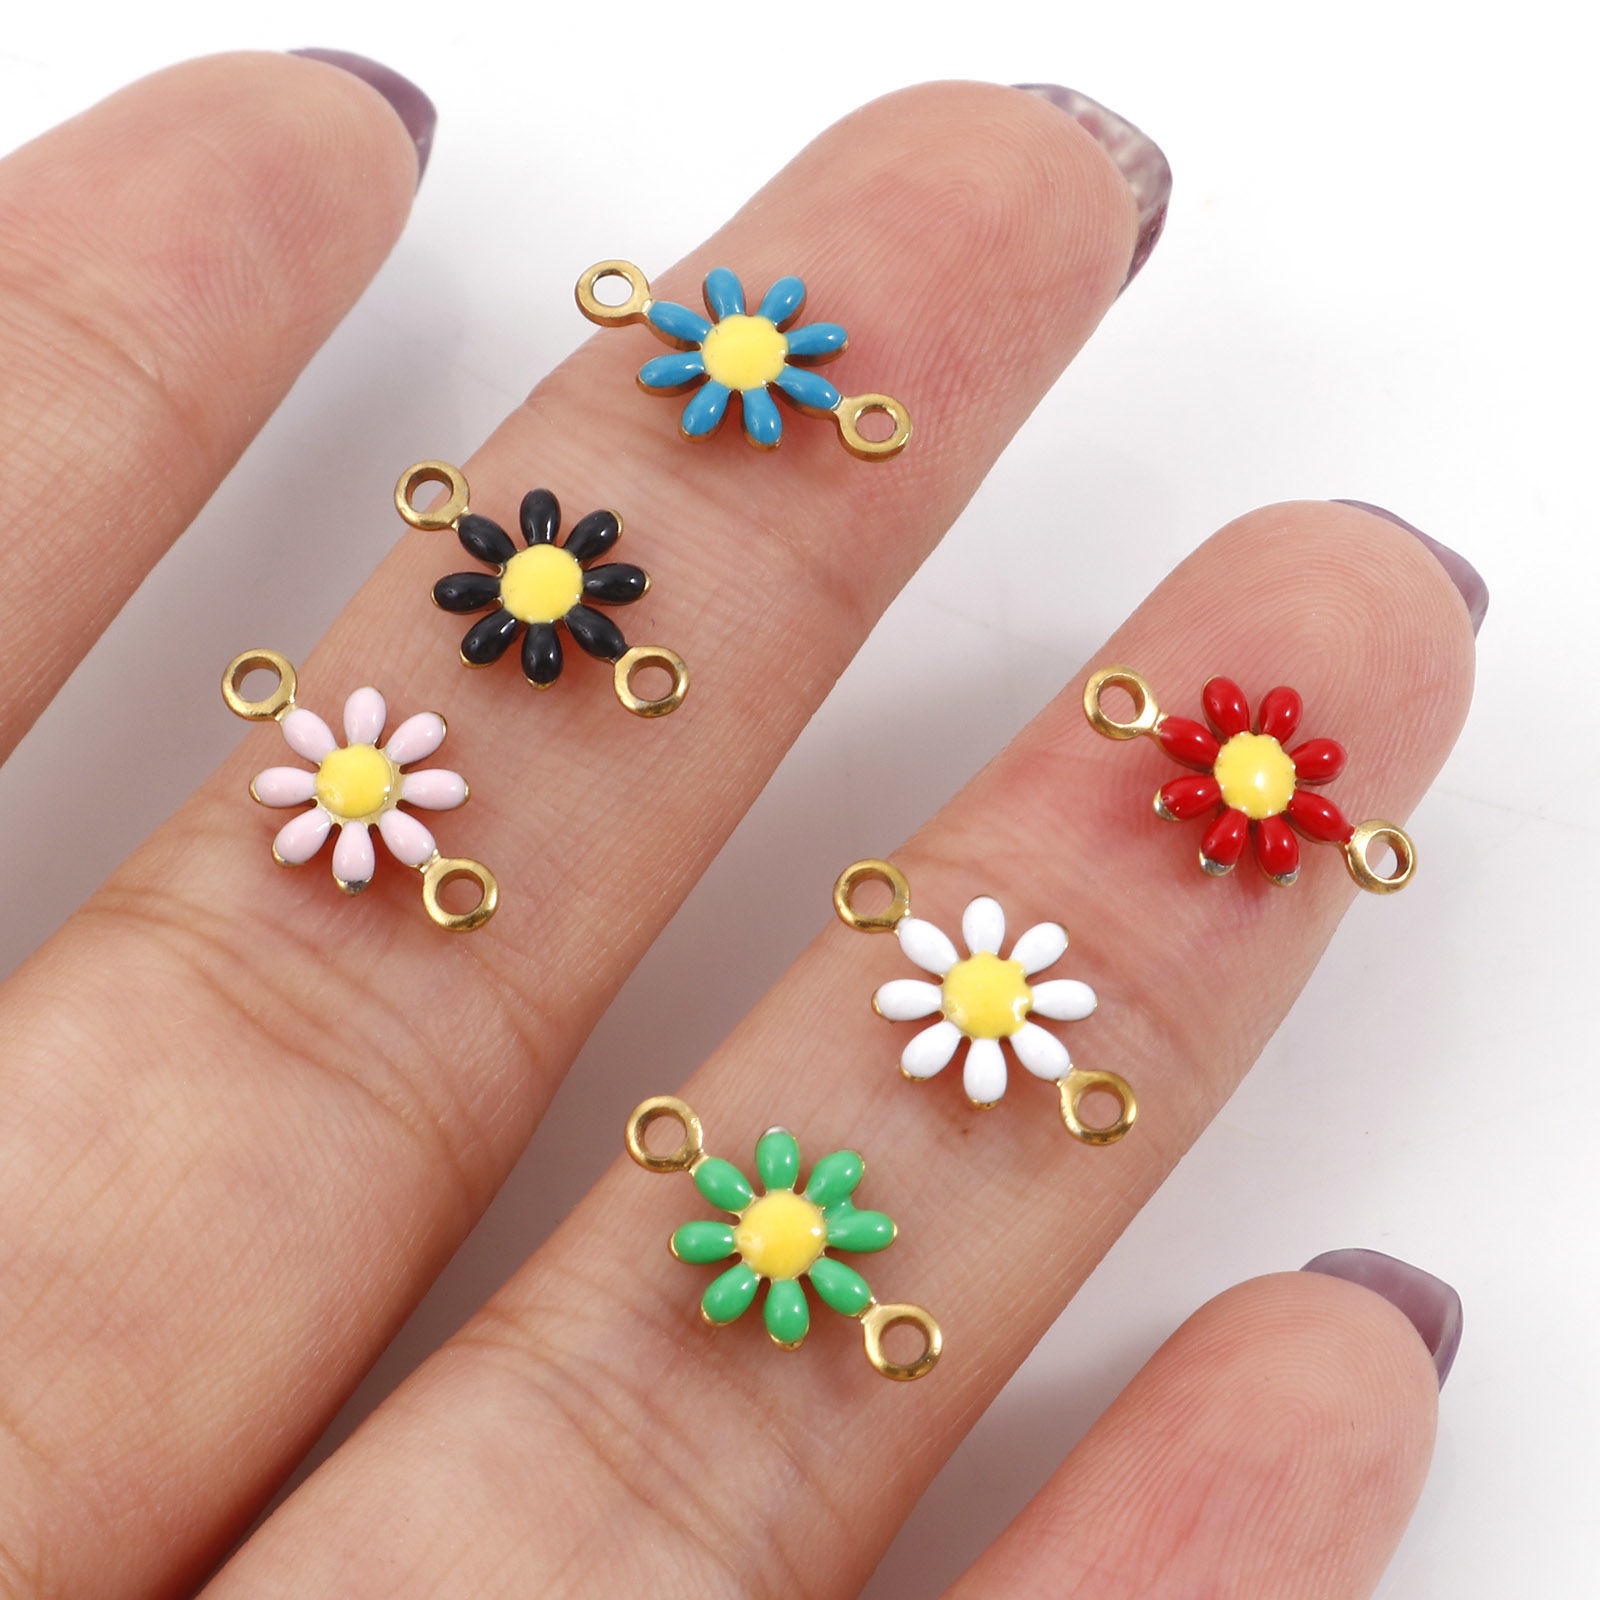 Picture of 304 Stainless Steel Connectors Gold Plated Daisy Flower Enamel 13mm x 7.5mm